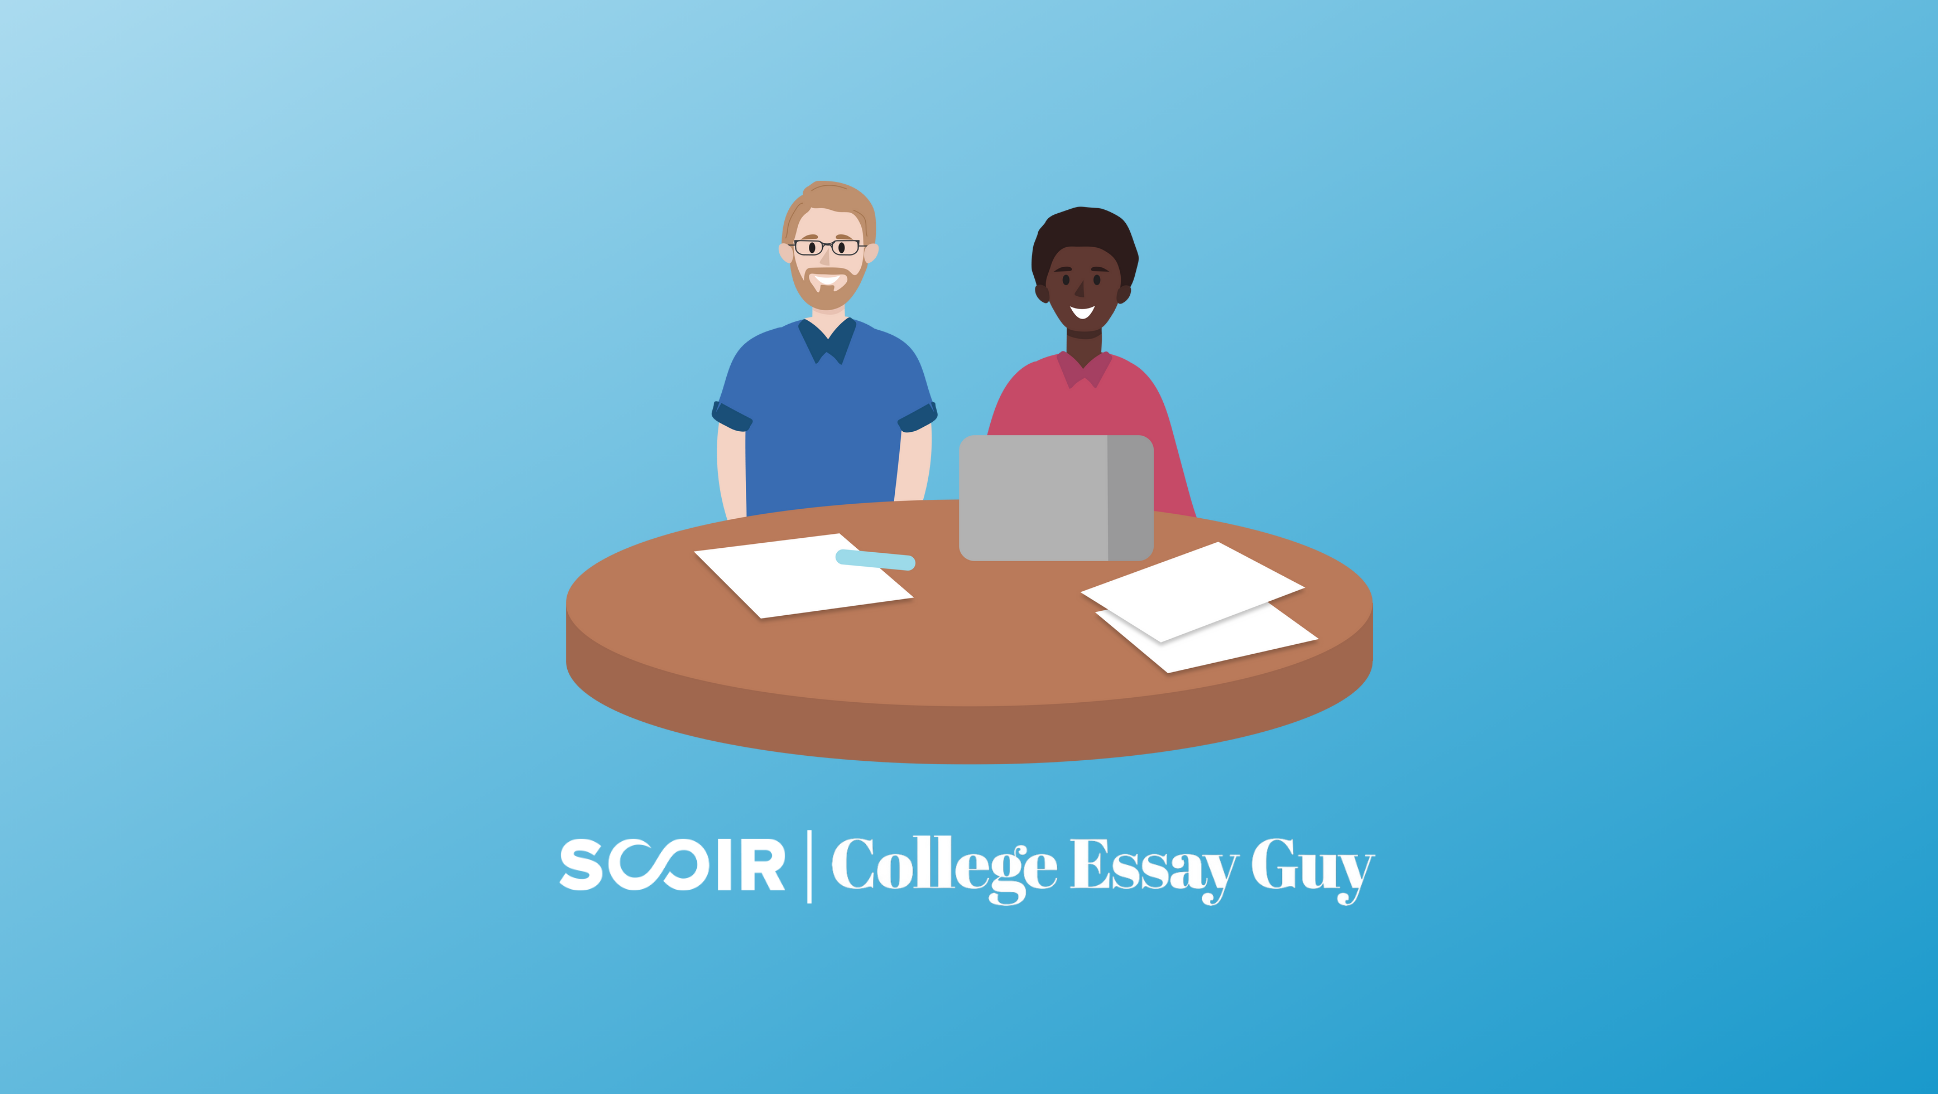 5 Biggest Tips on How to Stand Out on Your College Essay This Fall - illustration of College Essay Guy and student working on college essay